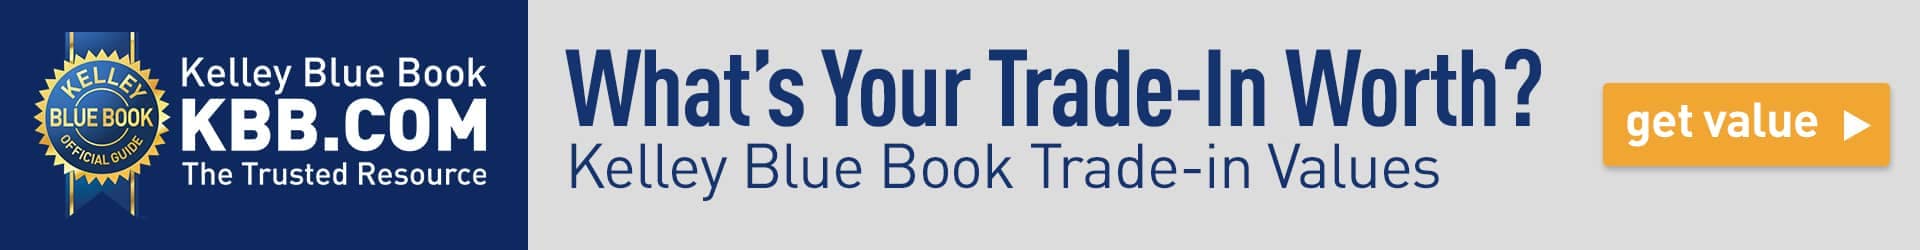 Kelly Blue Book - Value Your Trade